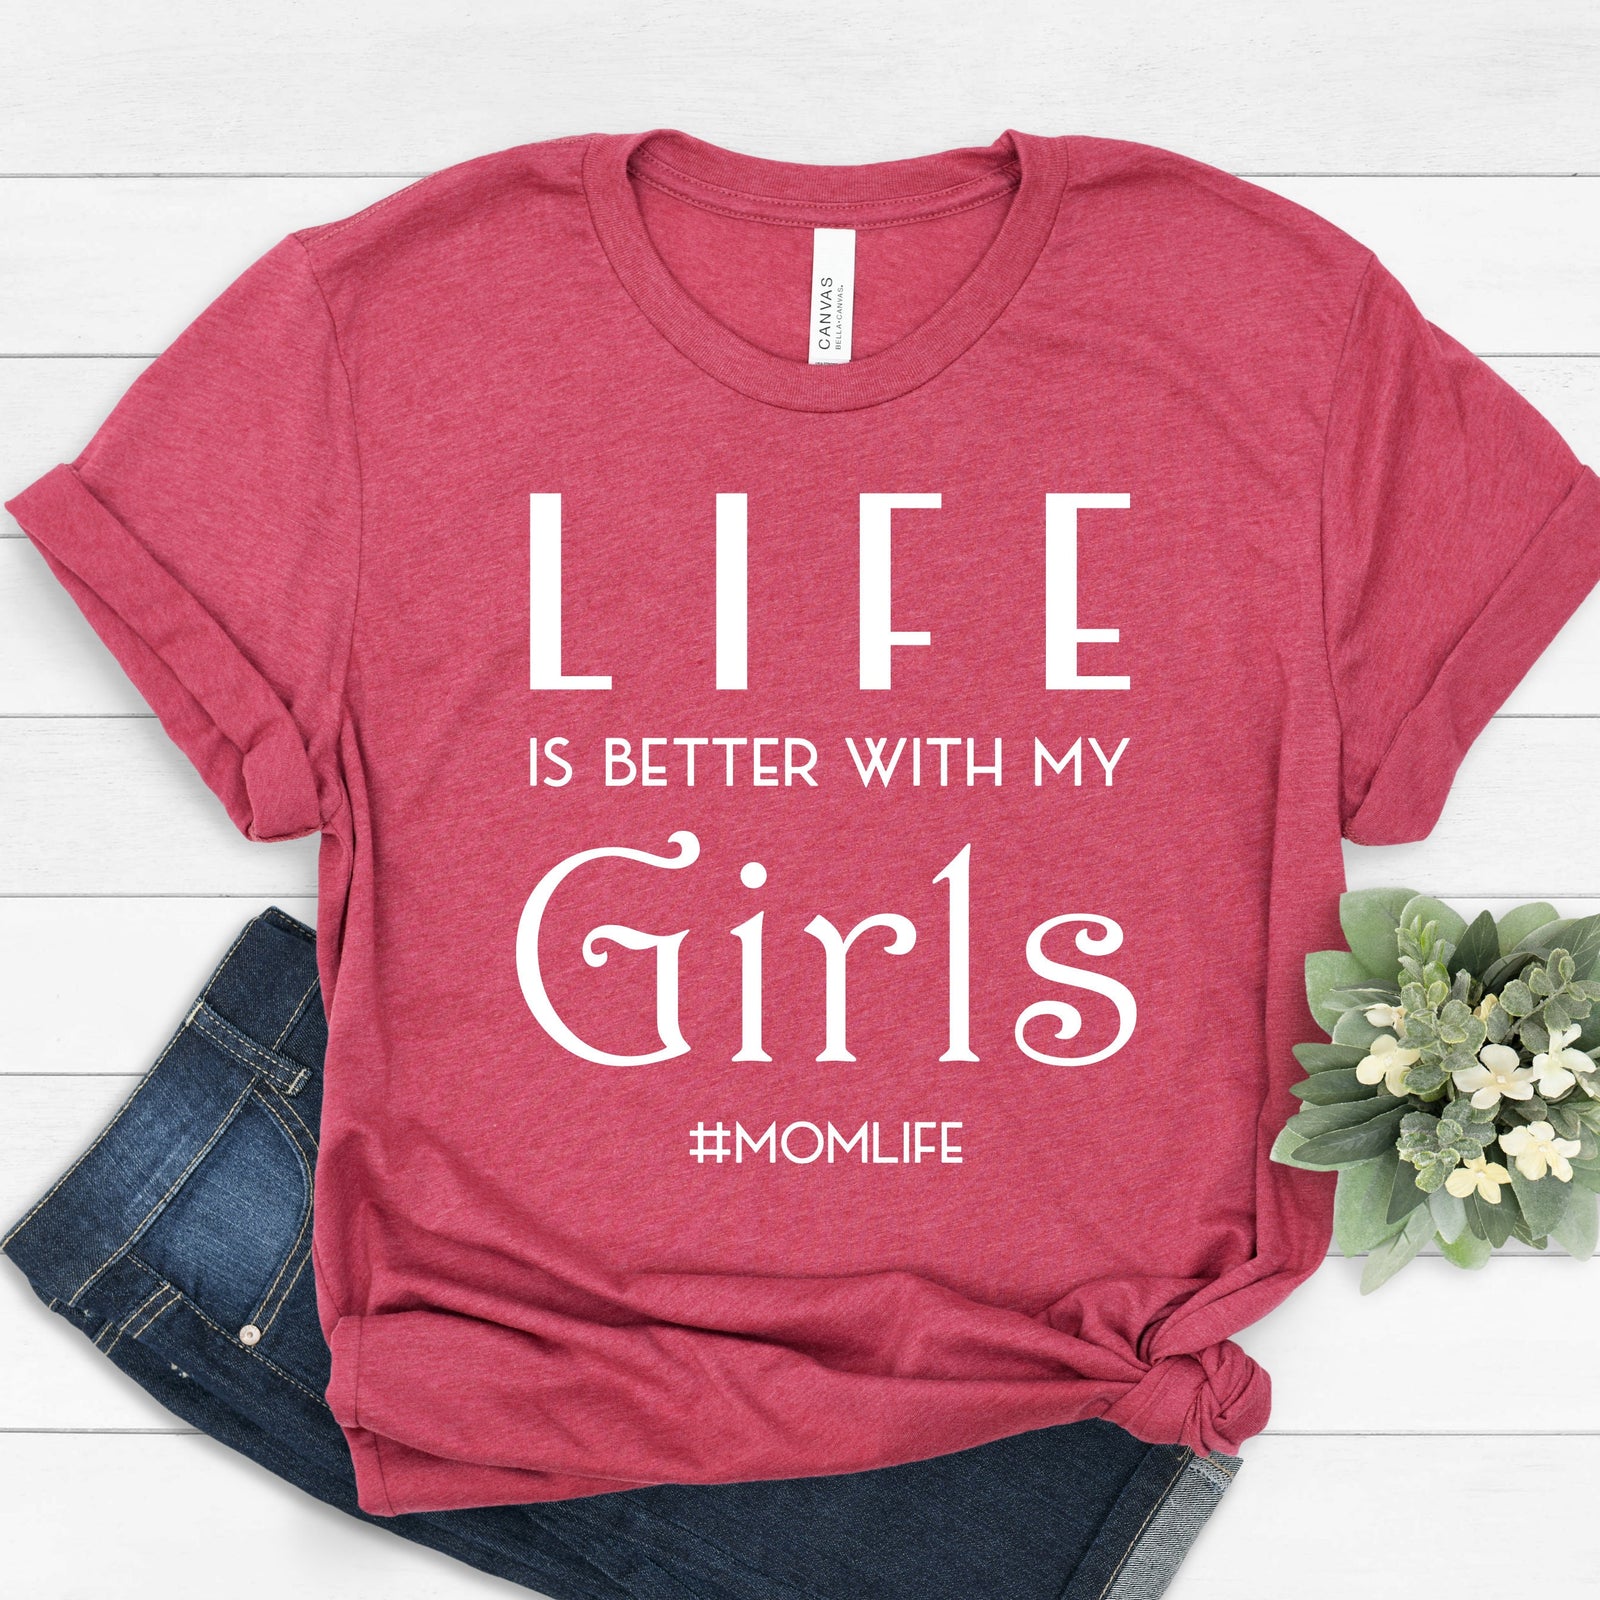 Life is Better with my Girls - Mom Life - Mother's Day Gift